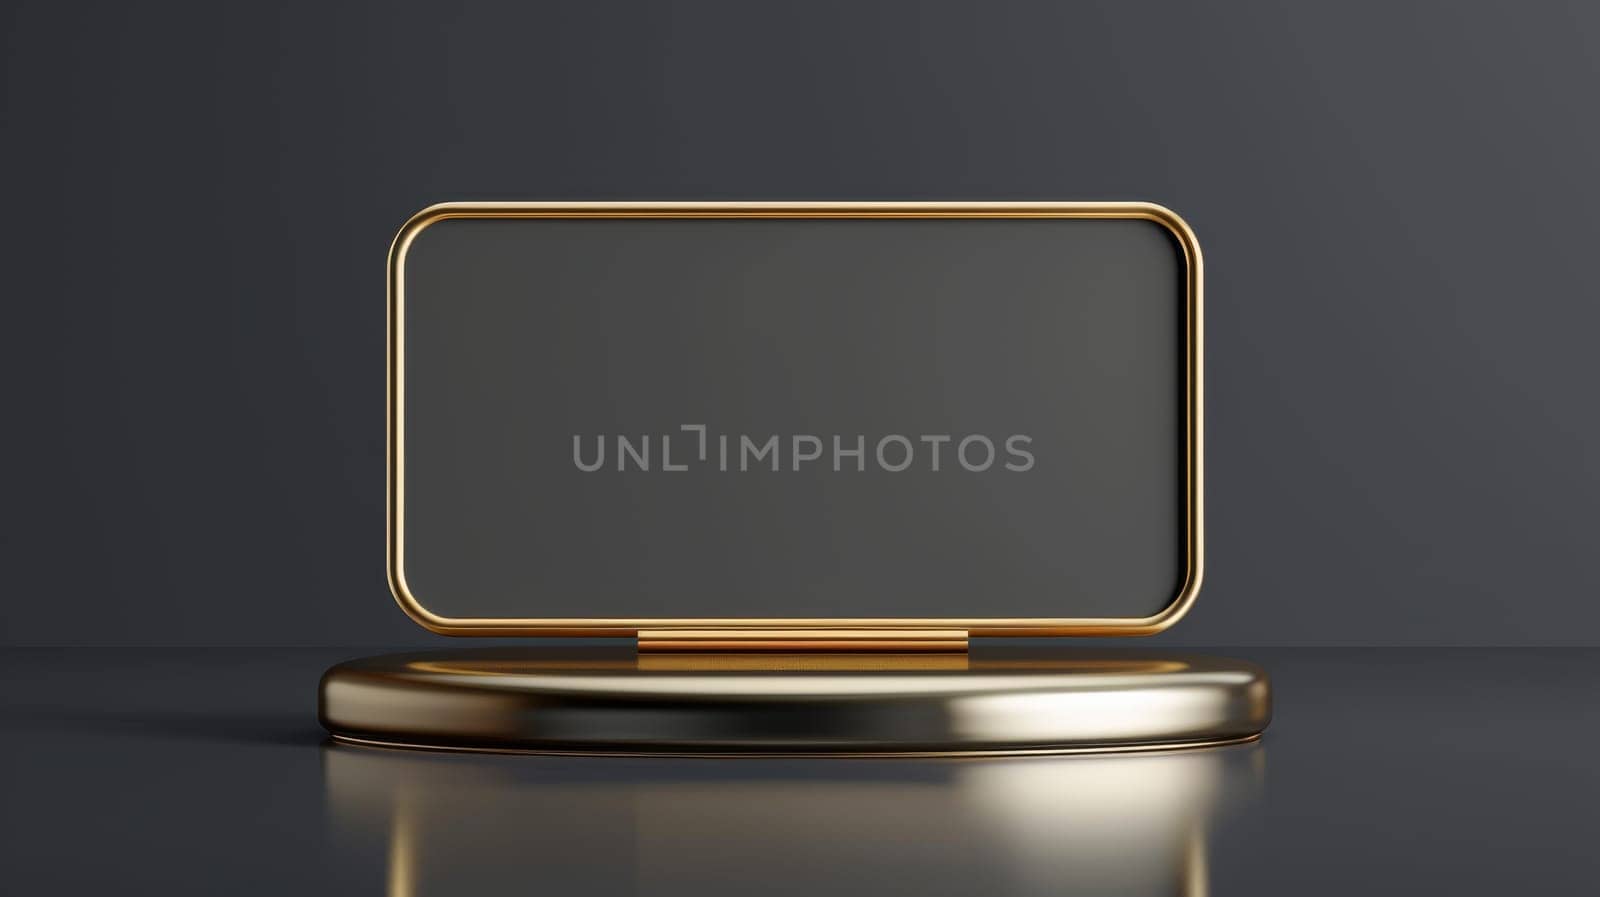 Identifier tag stand for events. Modern realistic mockup of golden and metal frames for nameplates on gray background.